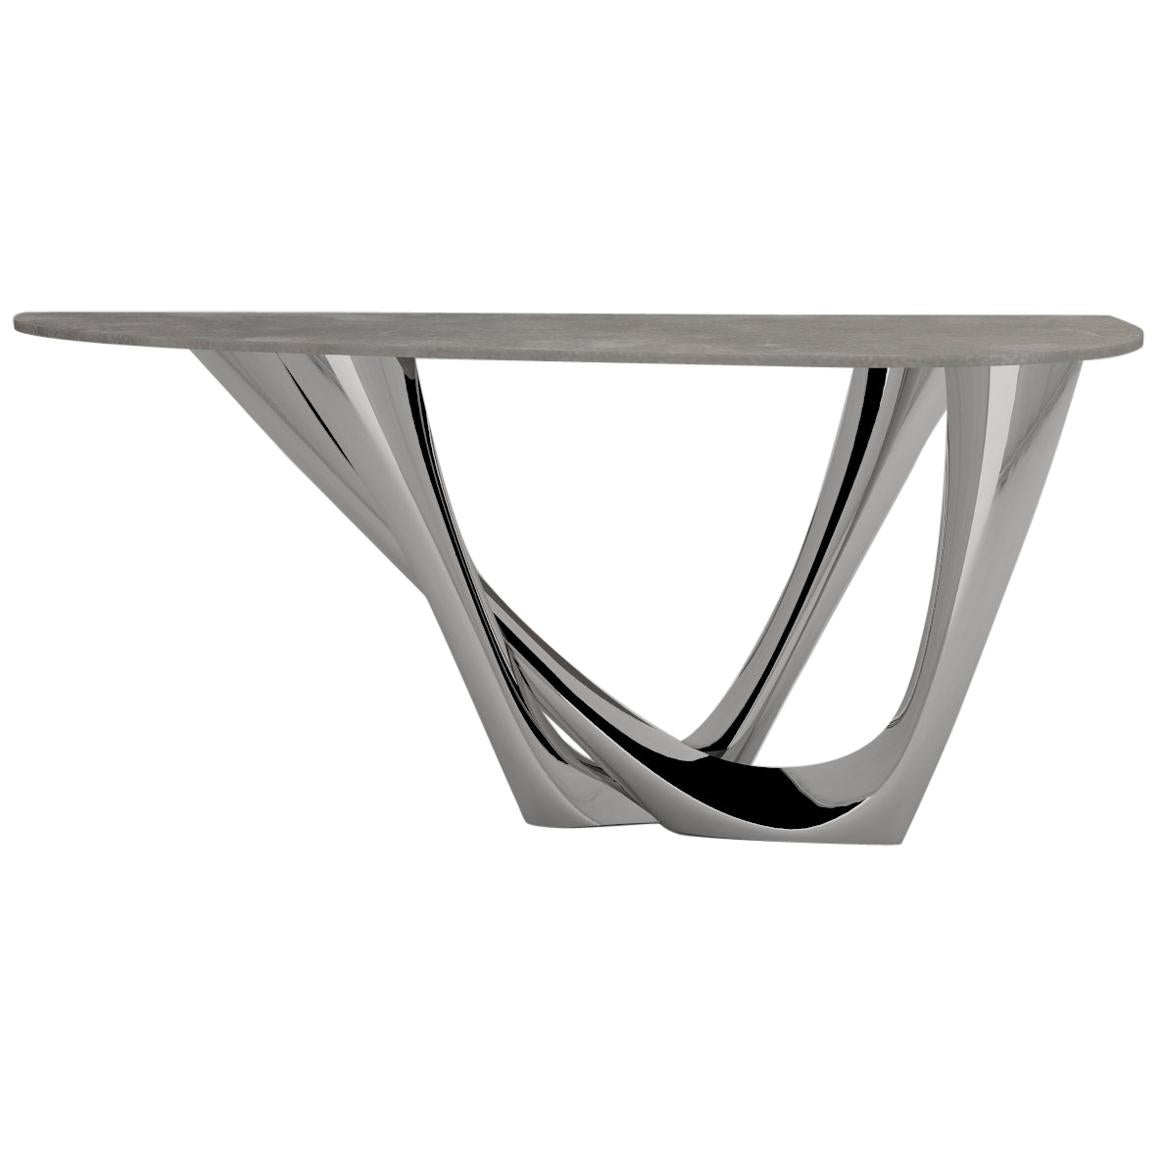 G-Console Duo Table in Polished Stainless Steel with Concrete Top by Zieta